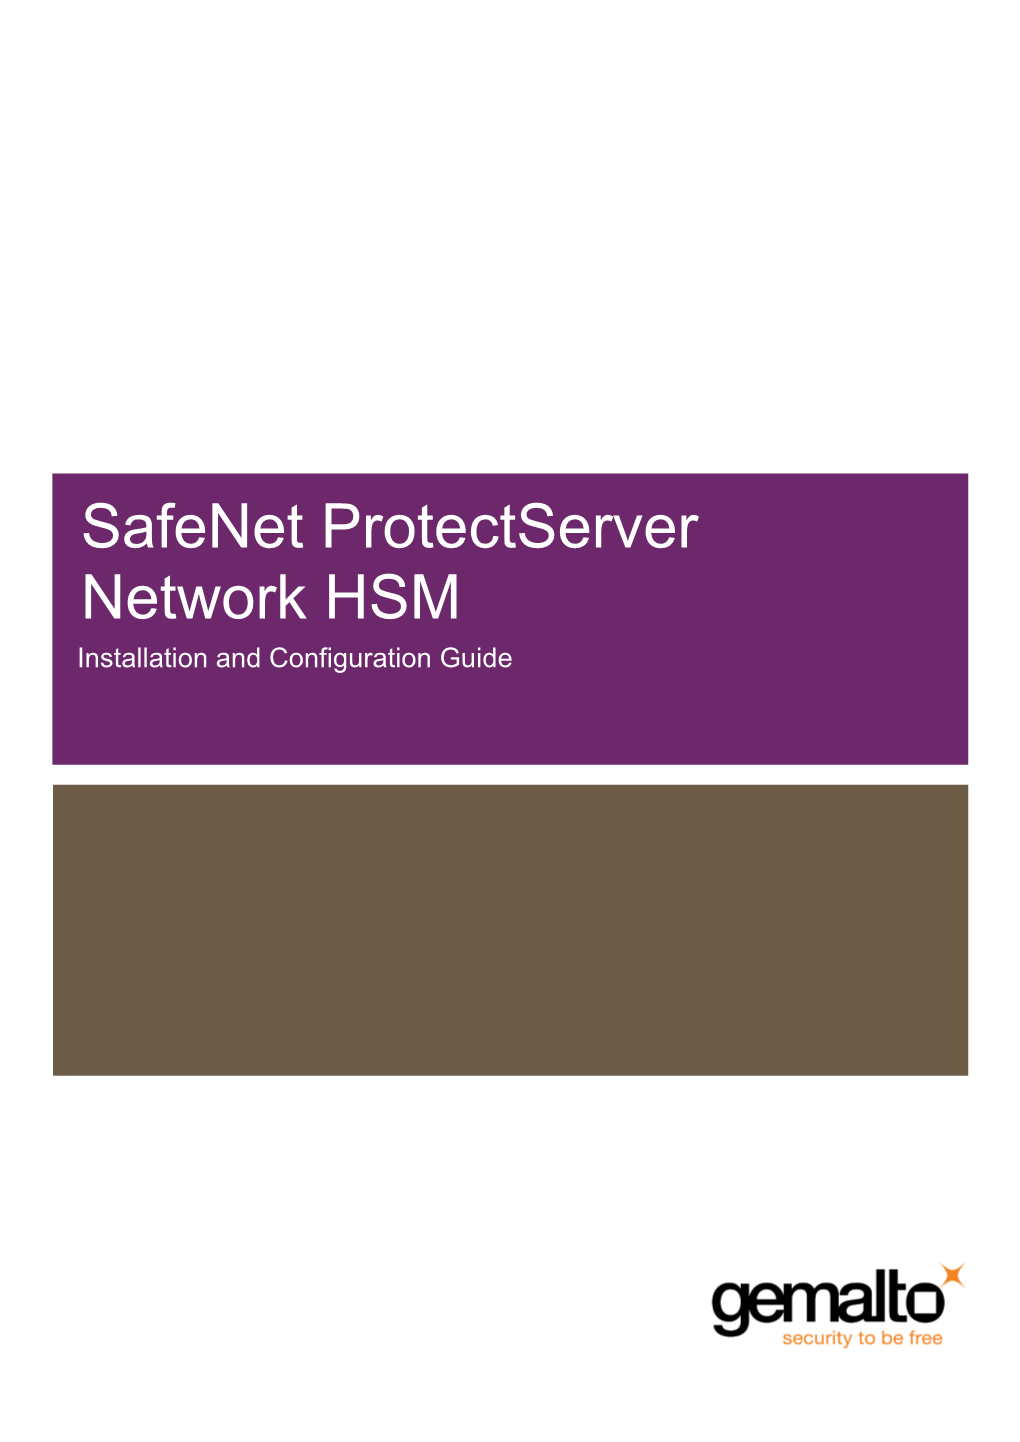 Safenet Protectserver Network HSM Installation and Configuration Guide